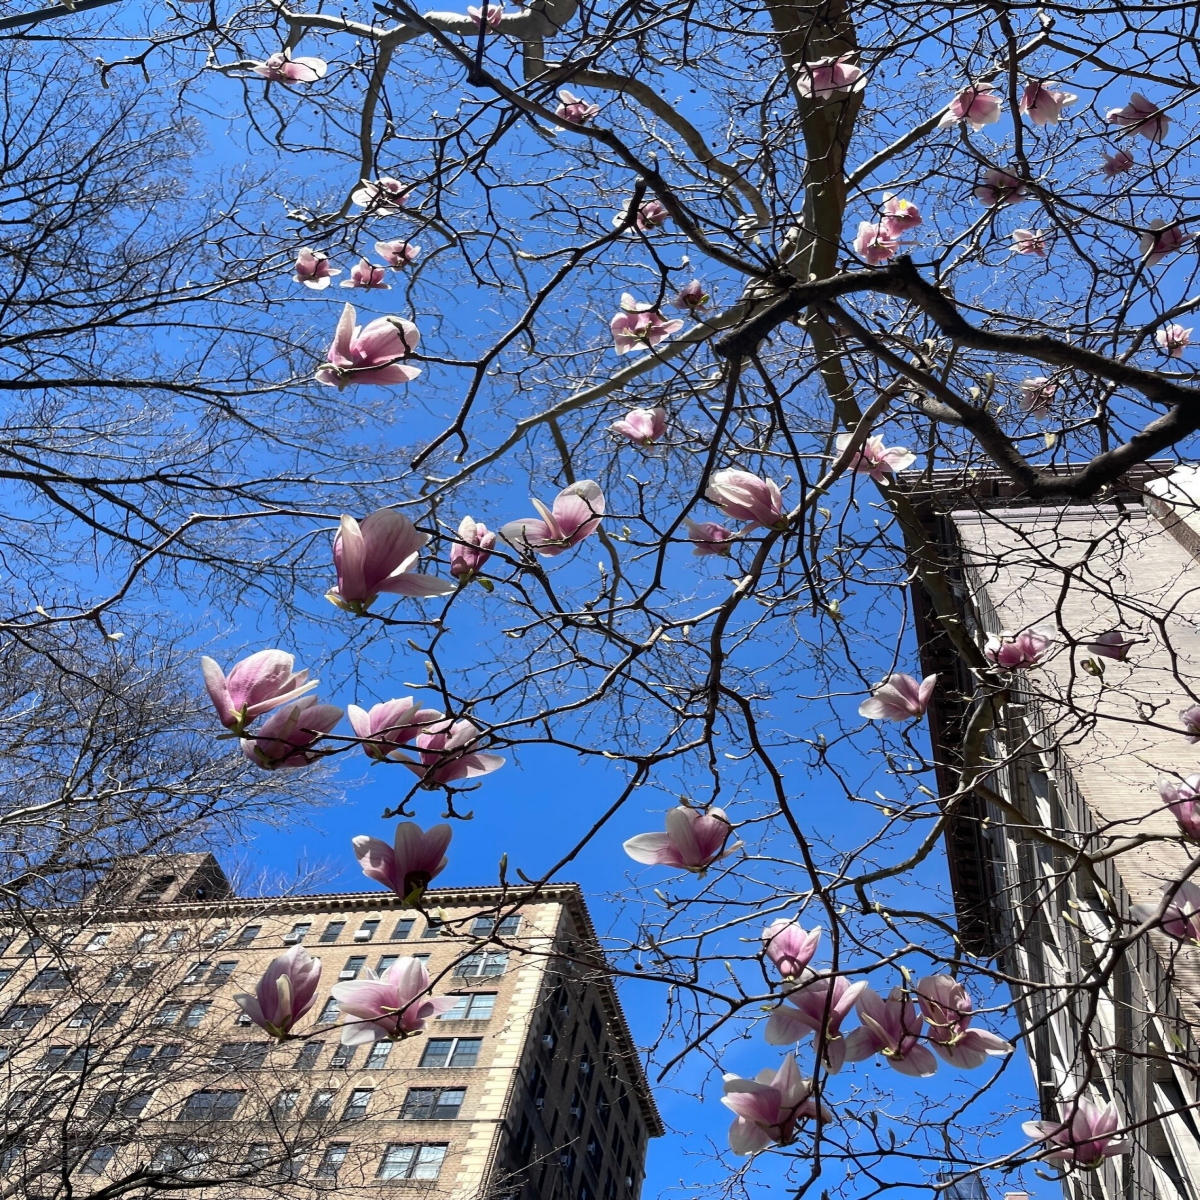 Upward view of buildings foregrounded by pink flowers from a tree.